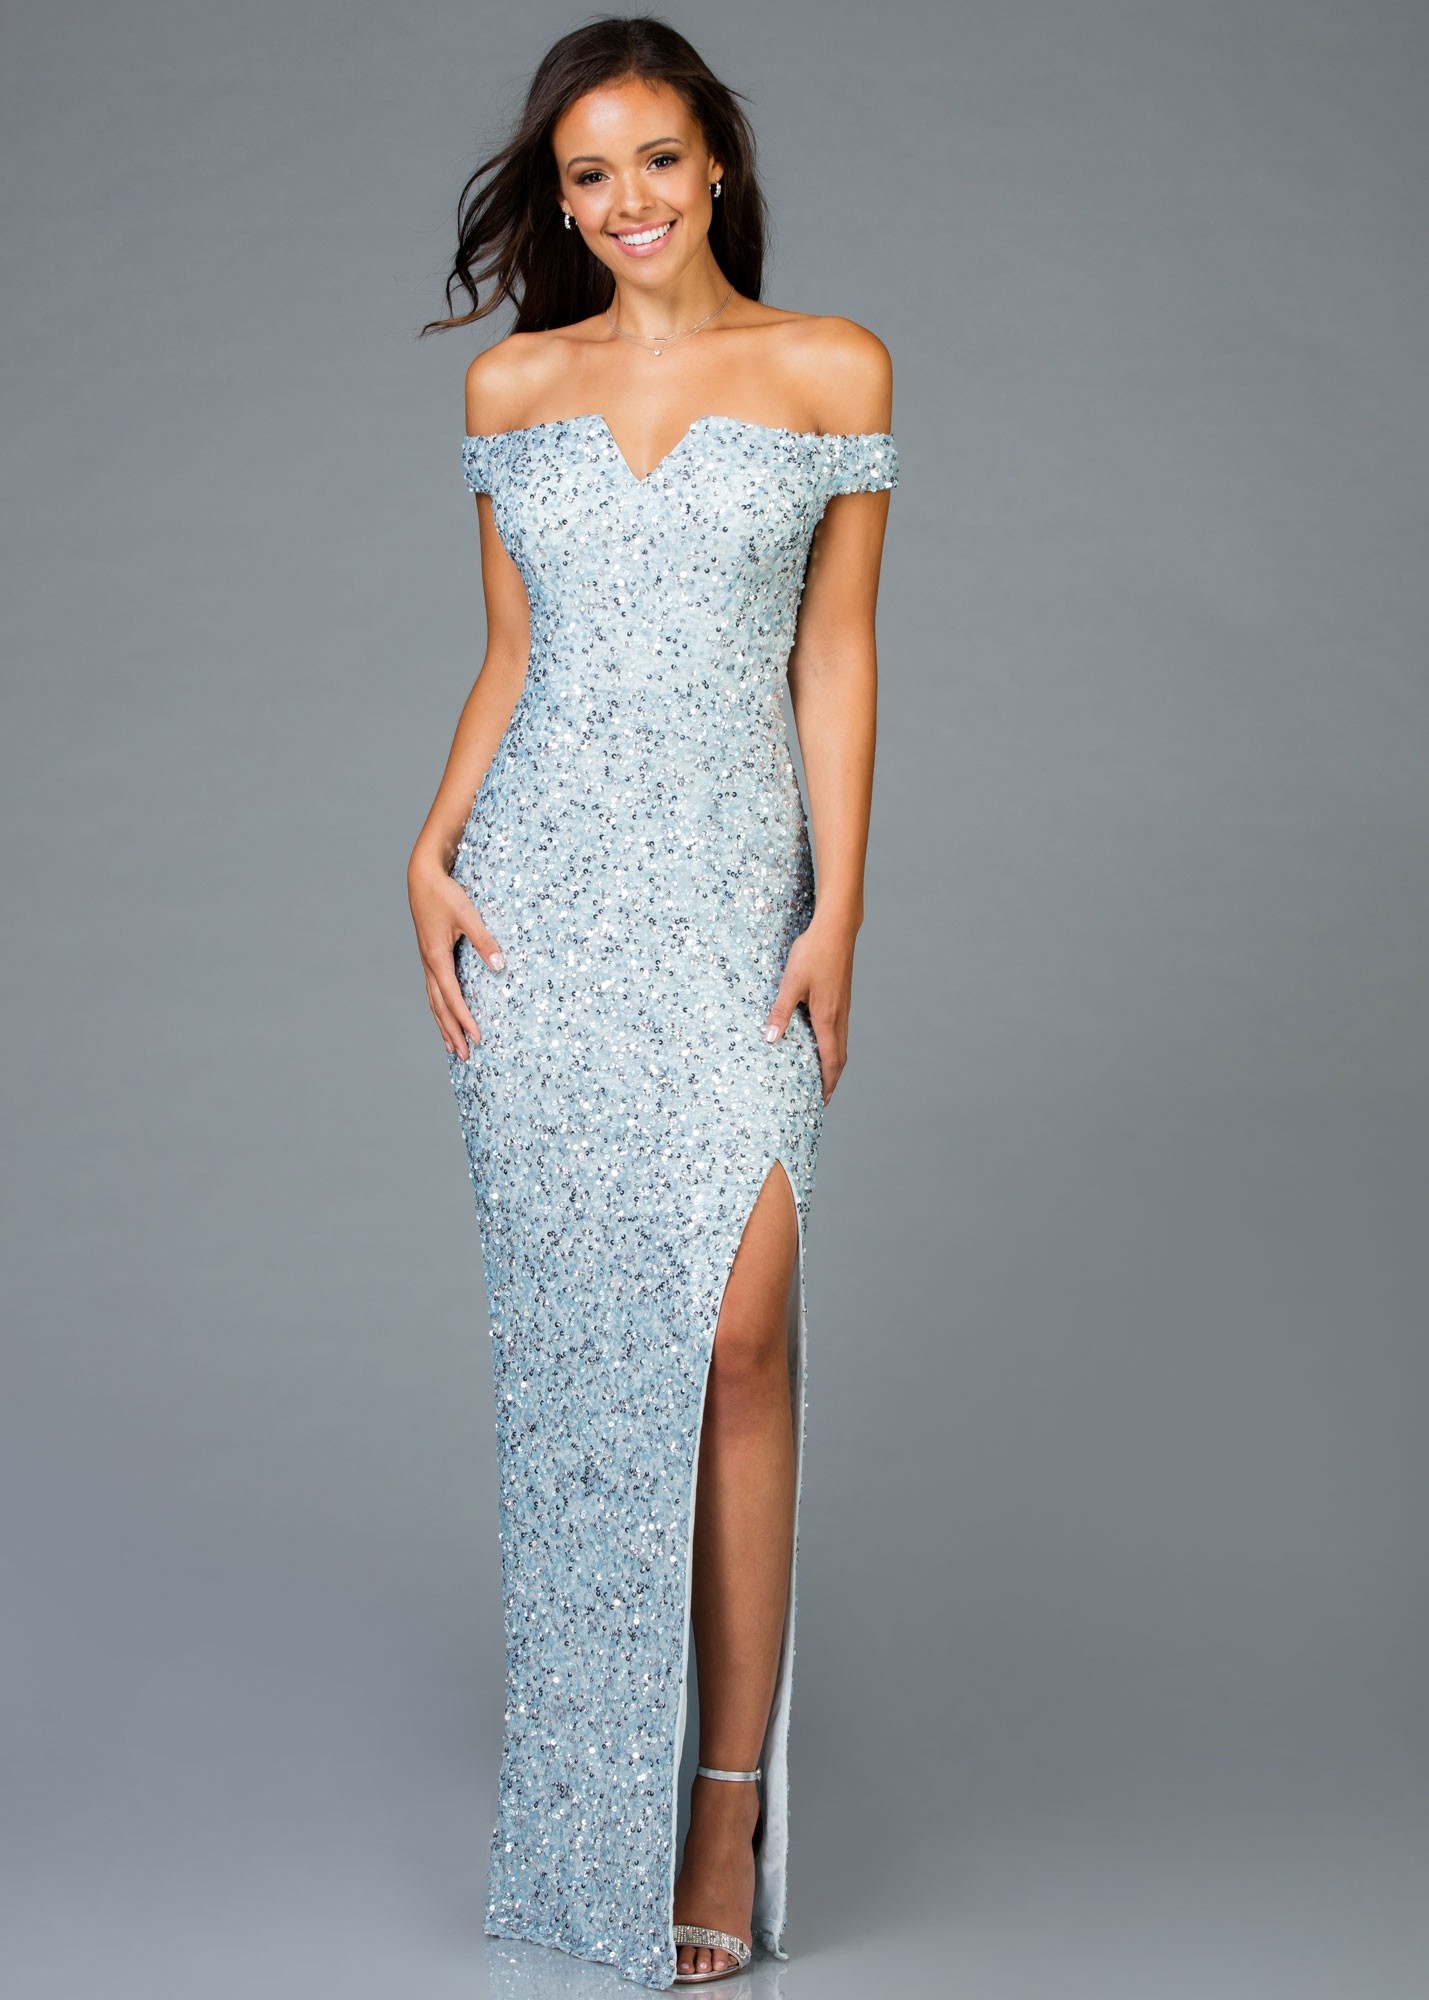 Scala 48985 Sequin Beaded Off the Shoulder Gown | RissyRoos.com